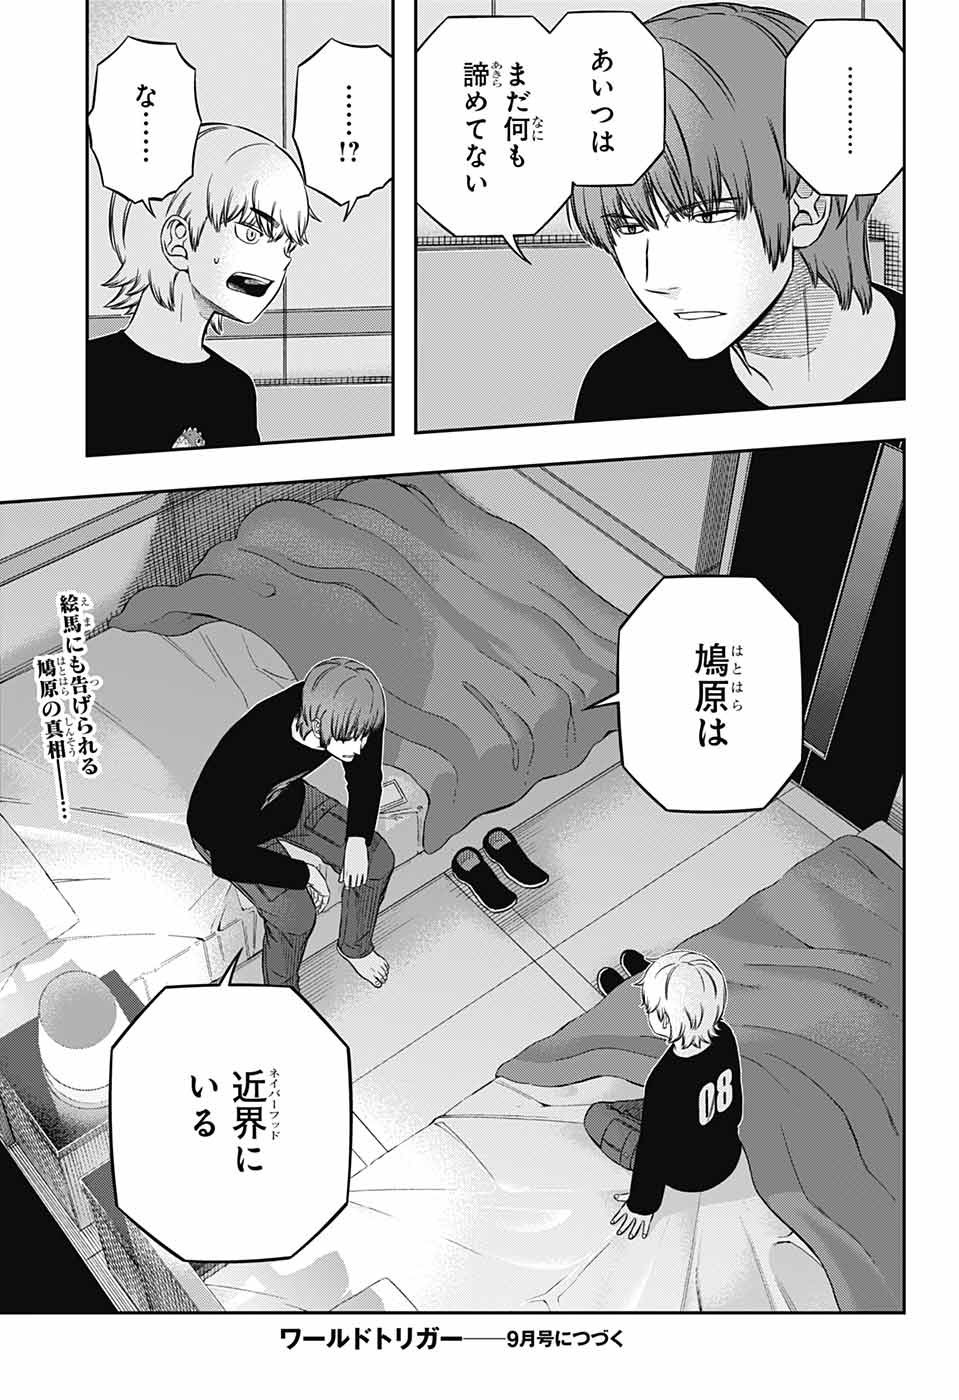 World Trigger - Chapter 235 - Page 25